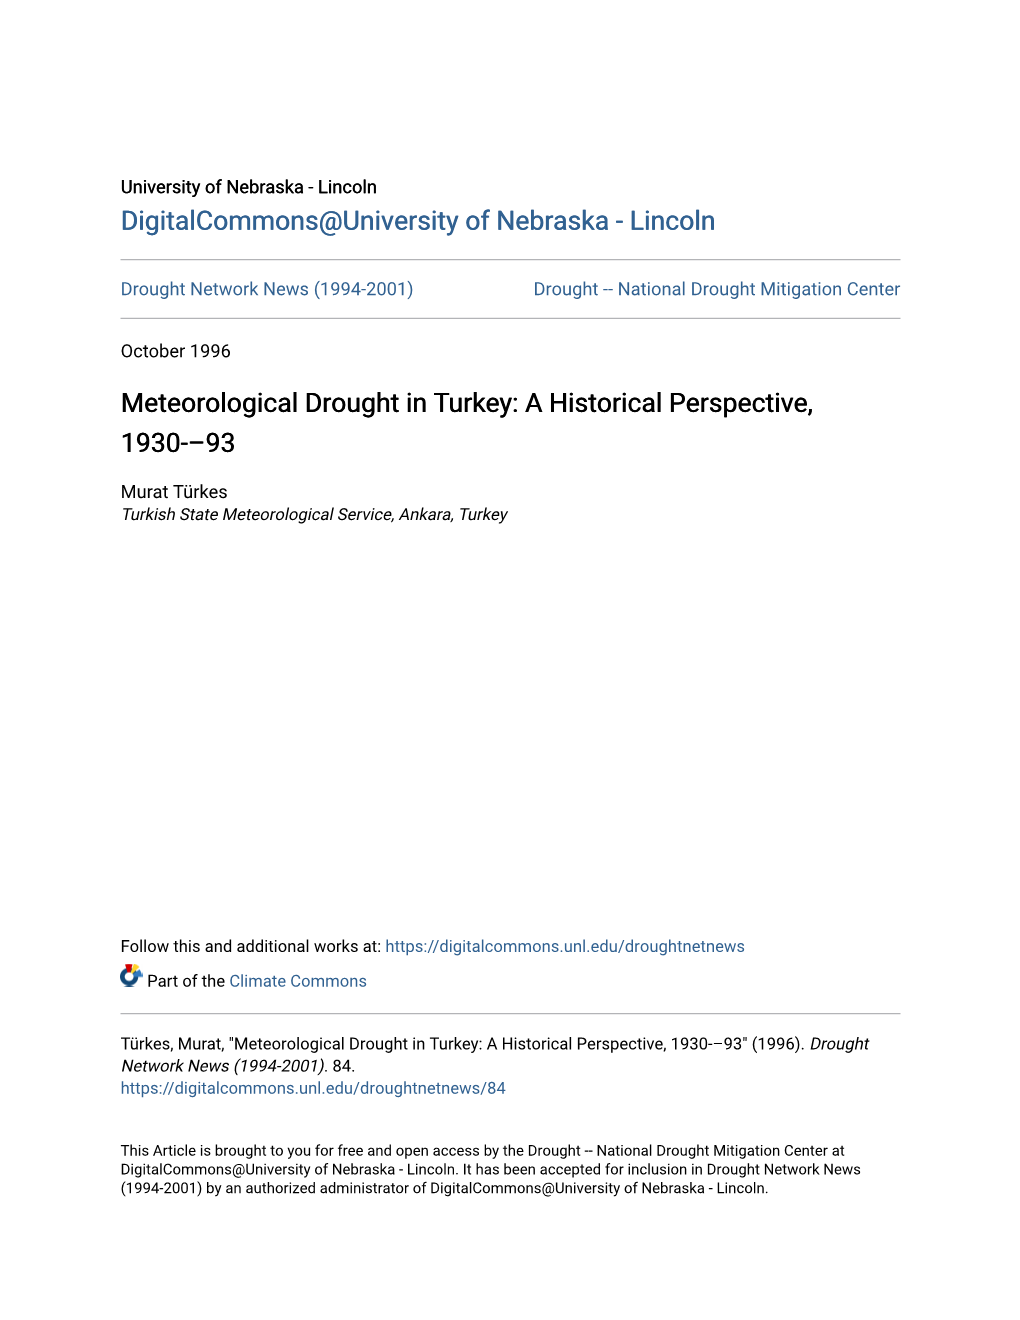 Meteorological Drought in Turkey: a Historical Perspective, 1930-–93